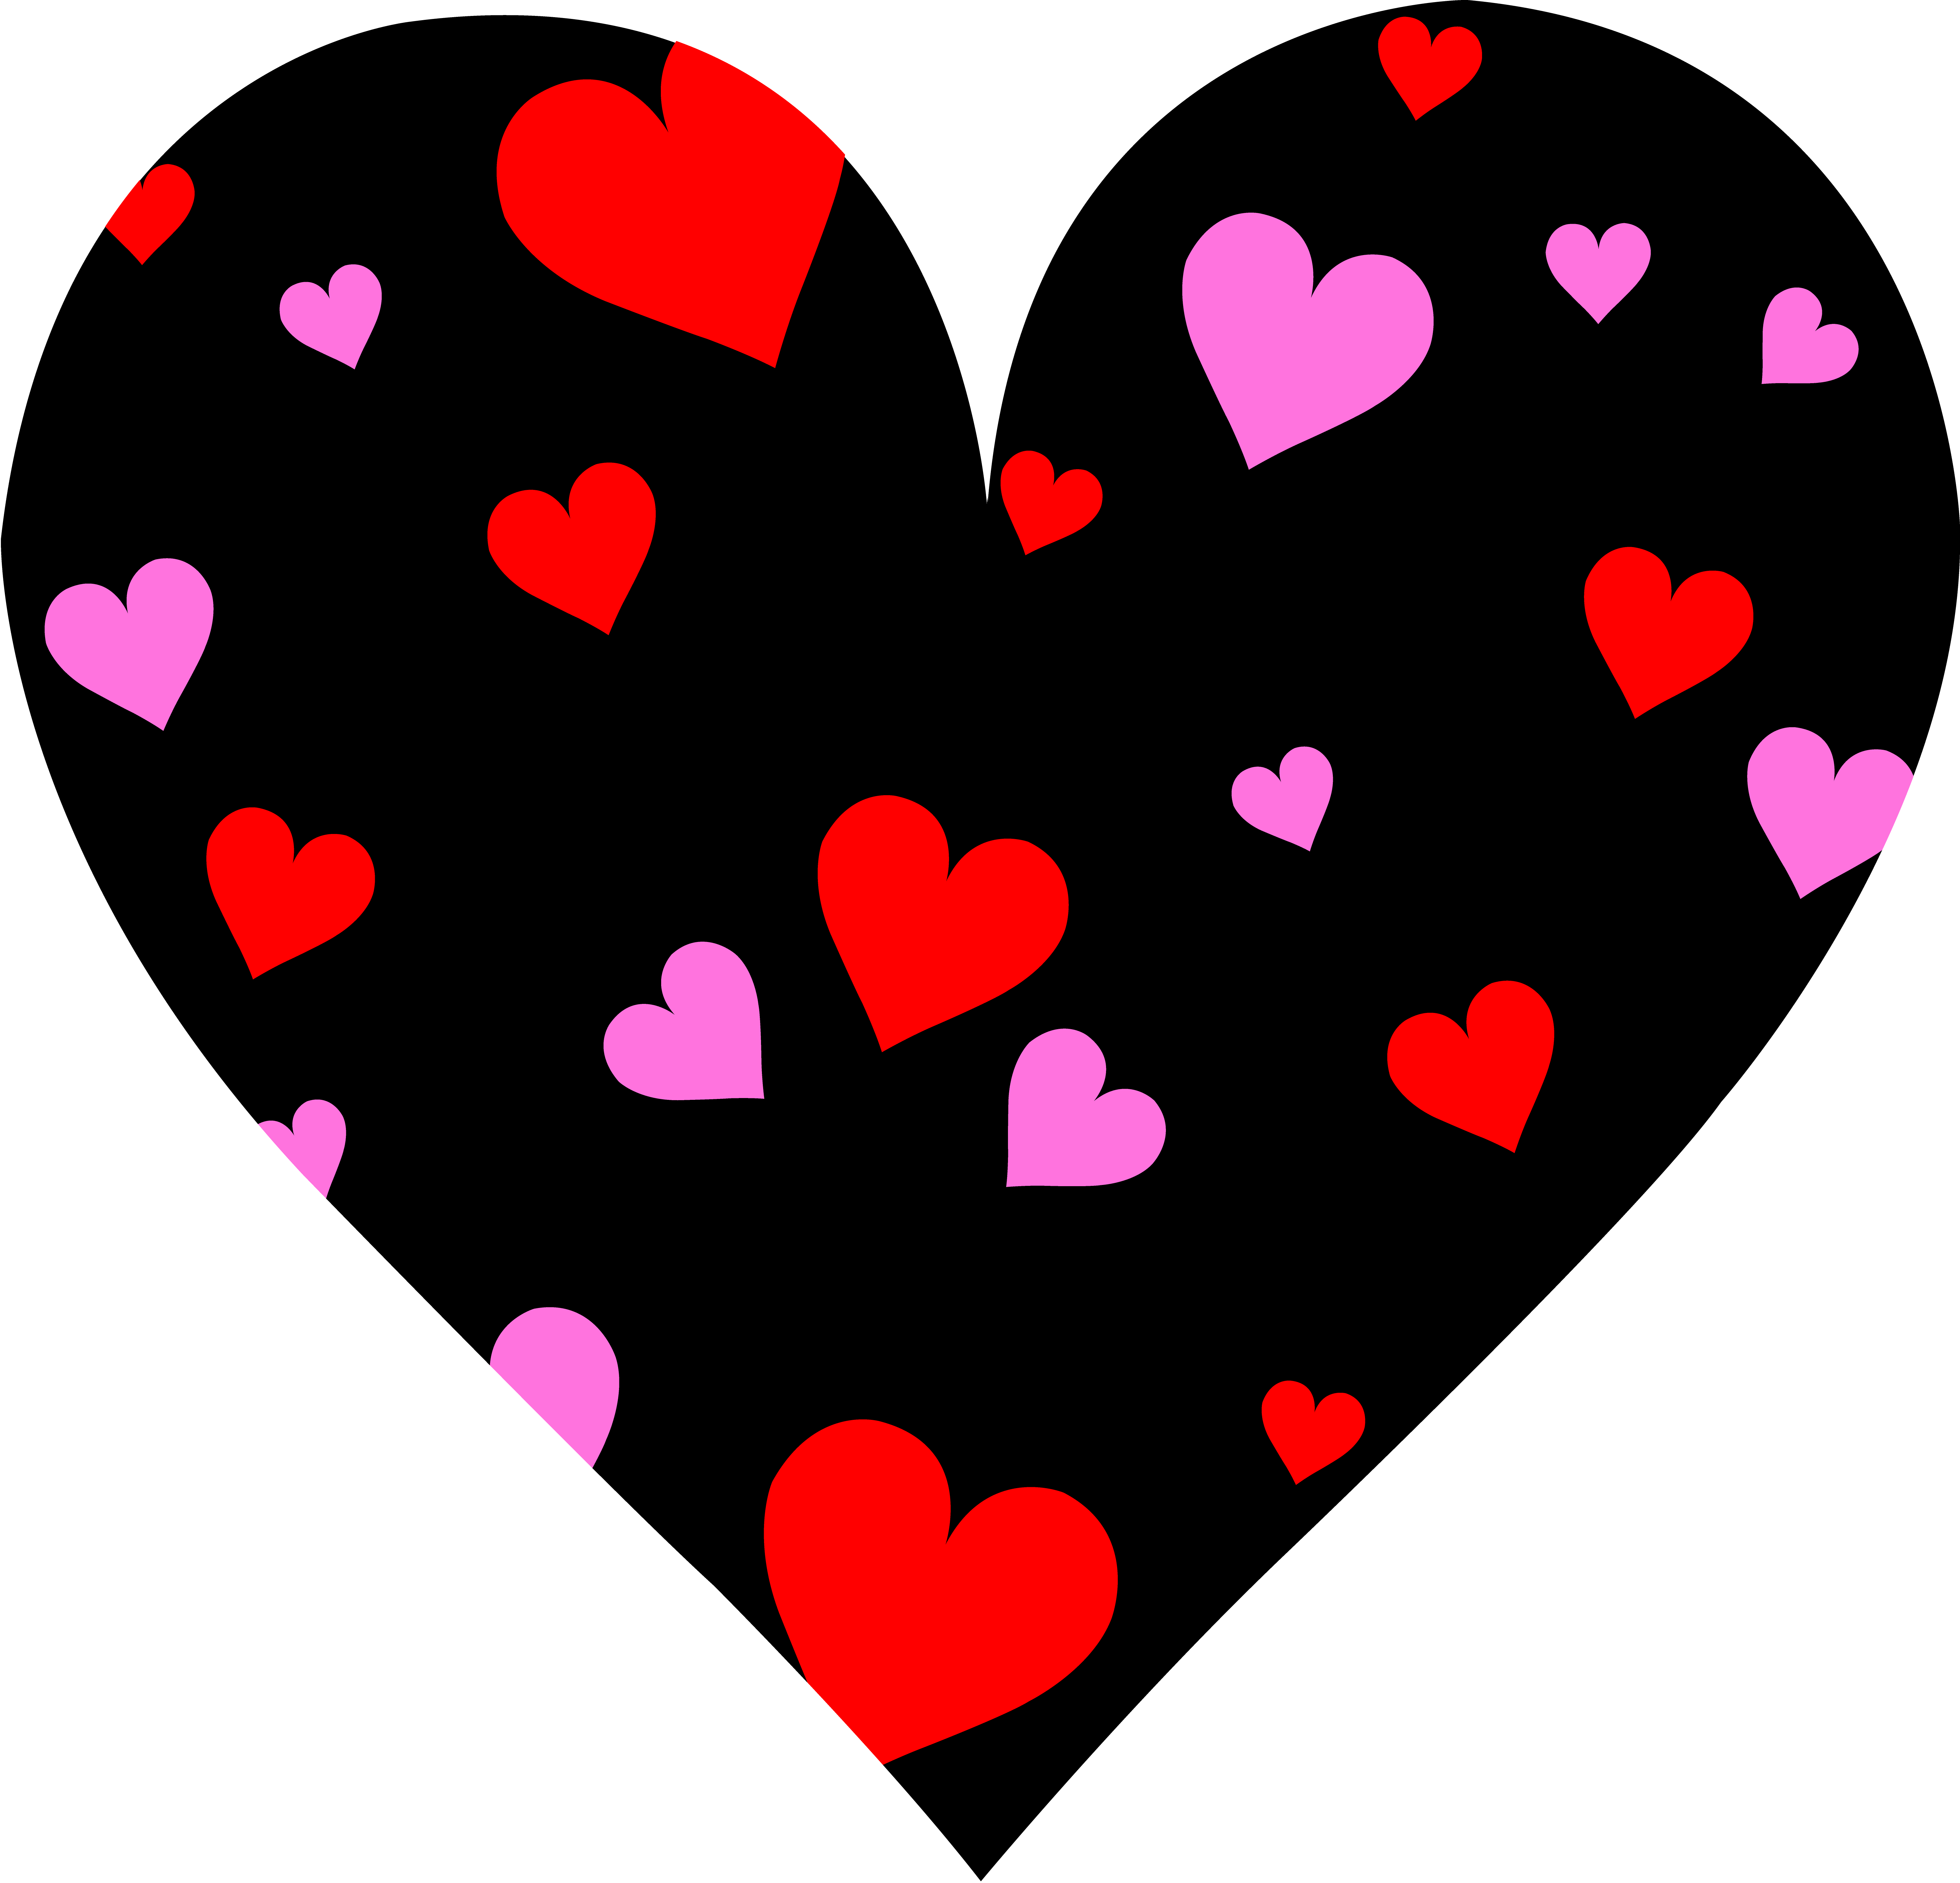 Cute Patterned Valentines Day Heart Free clipart free image.